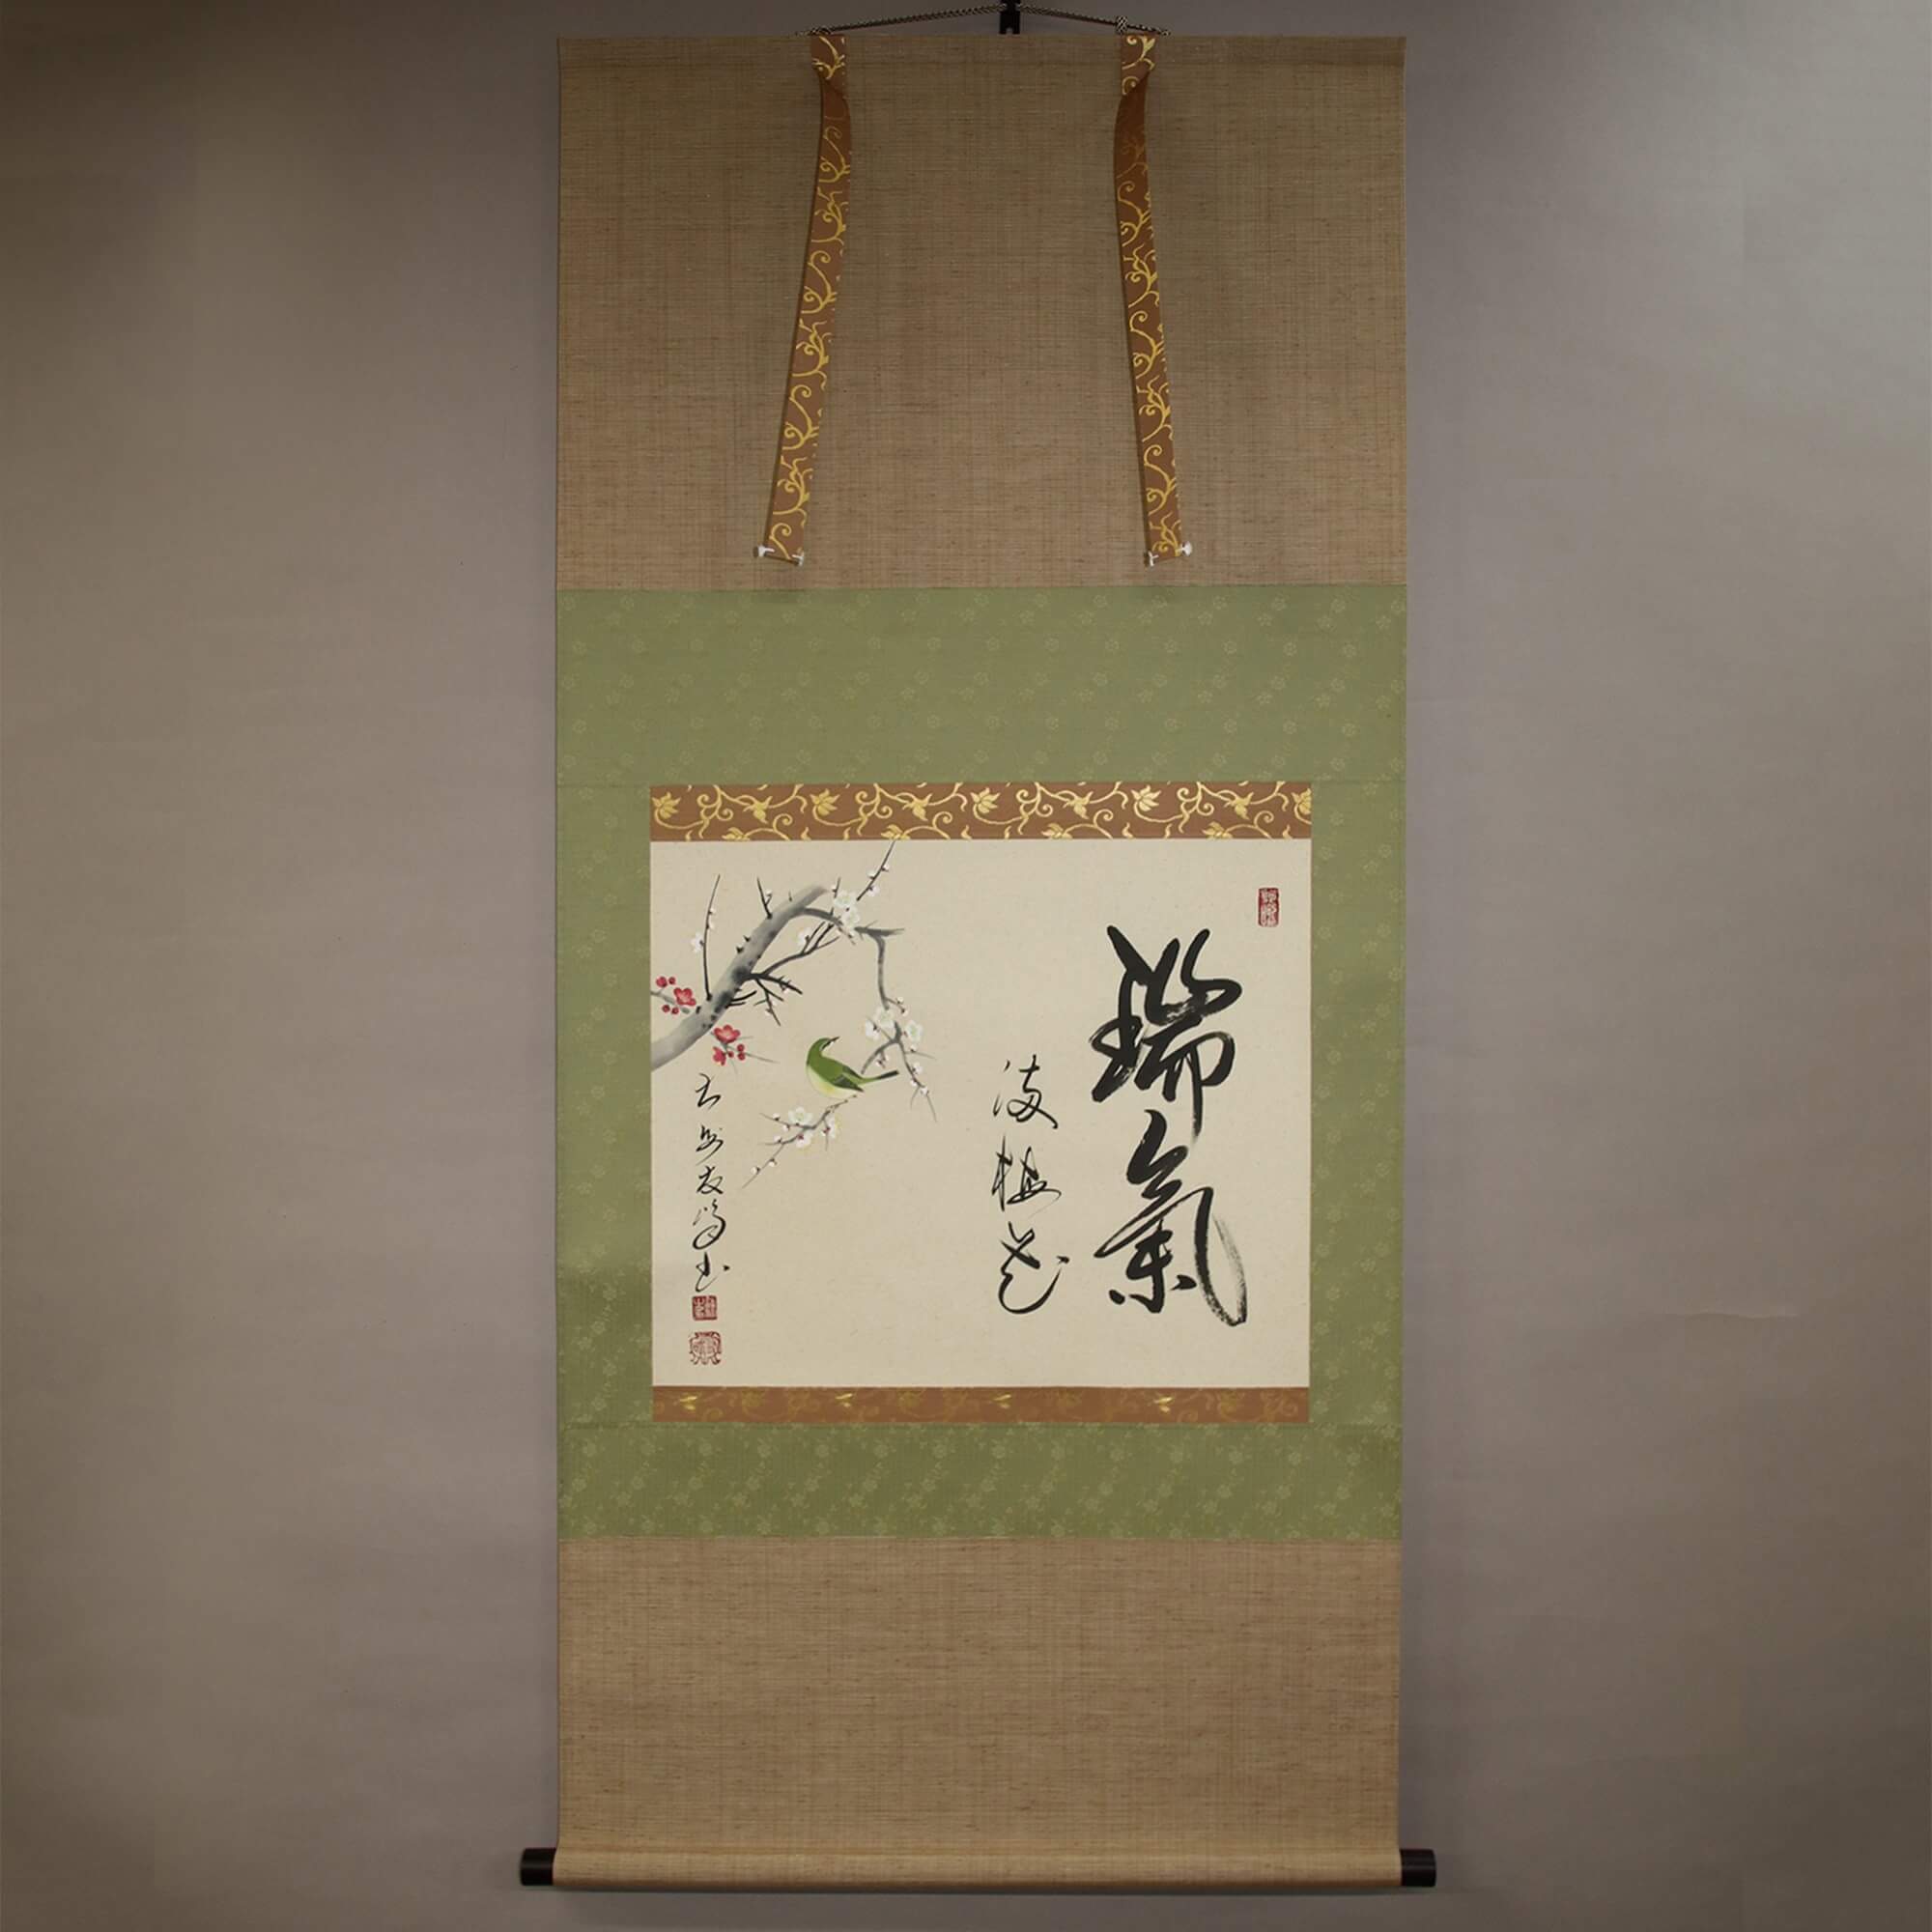 Calligraphy : Plum Blossom Is Full of a Splendidly Divine Atmosphere / Red & White Plum Blossom and Warbler / Takahashi Yūhō